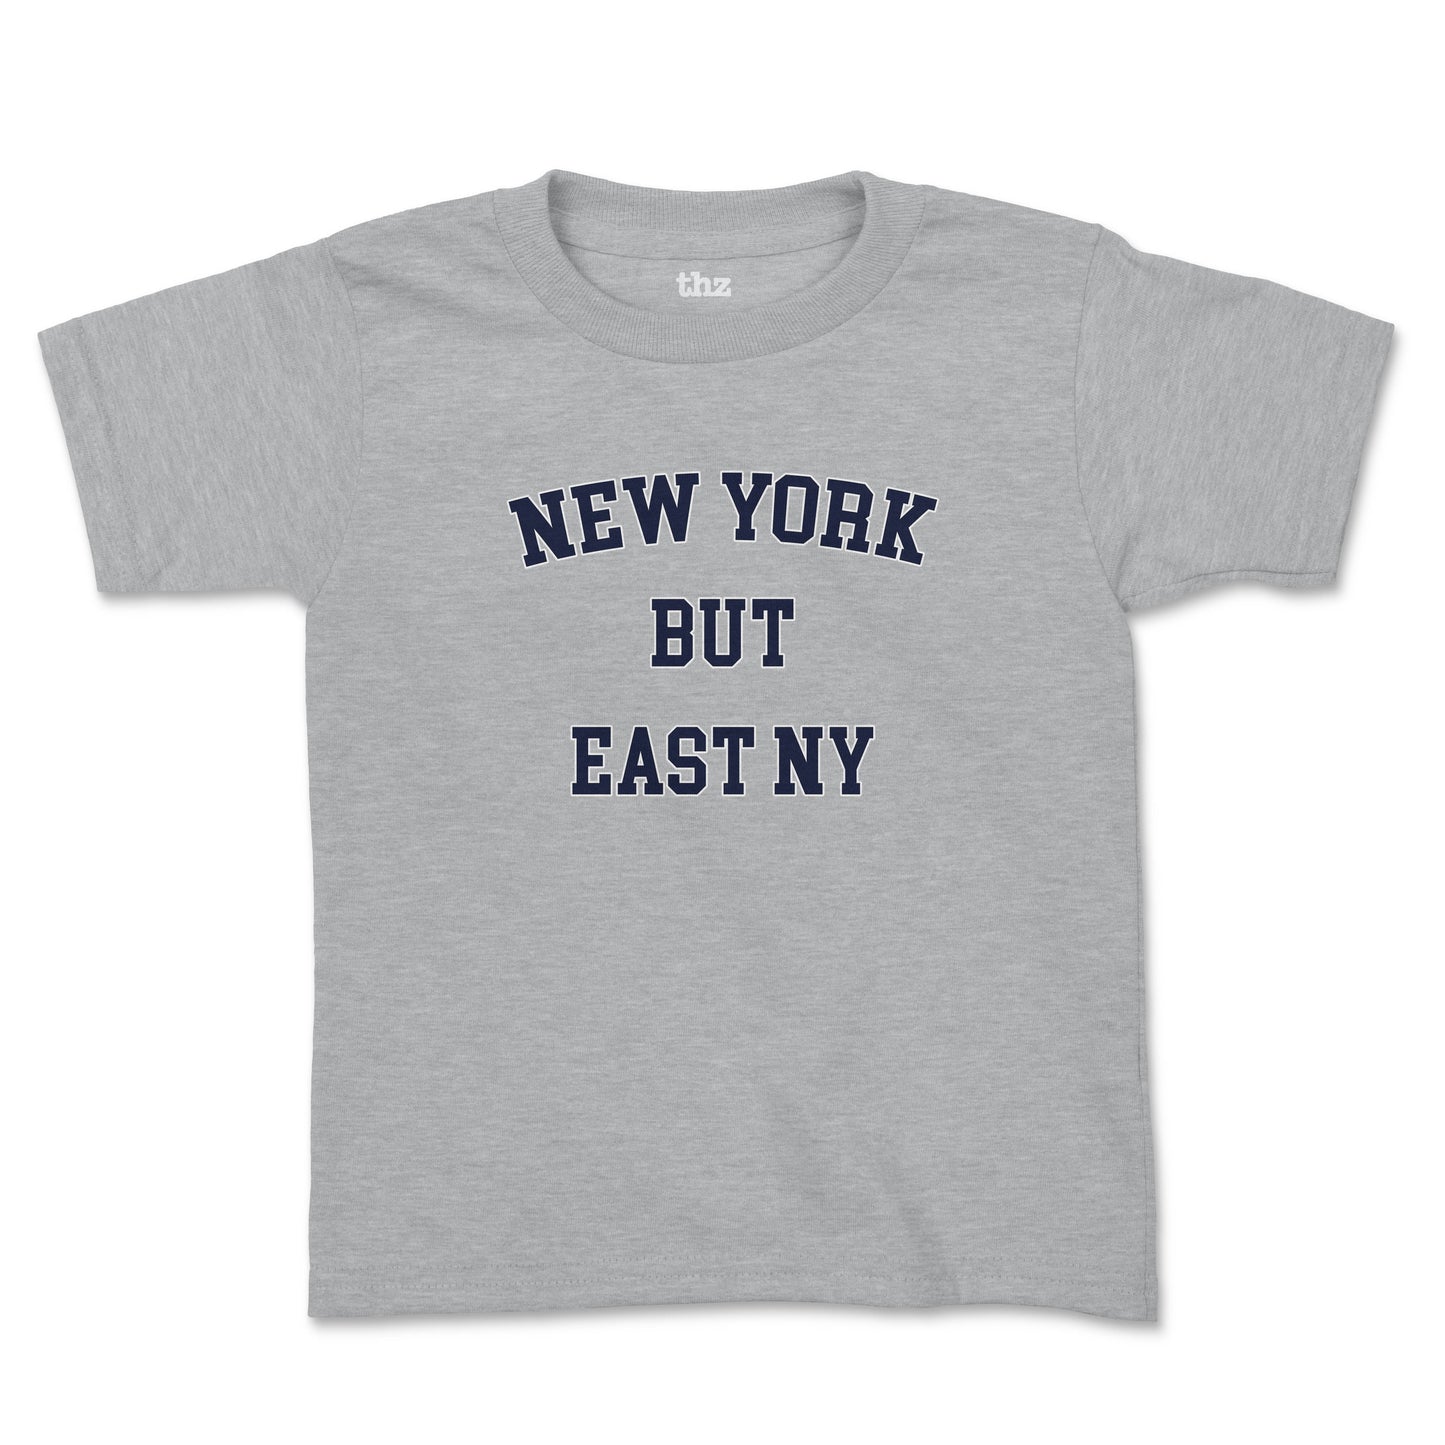 New York But East NY Toddler Jersey T-Shirt